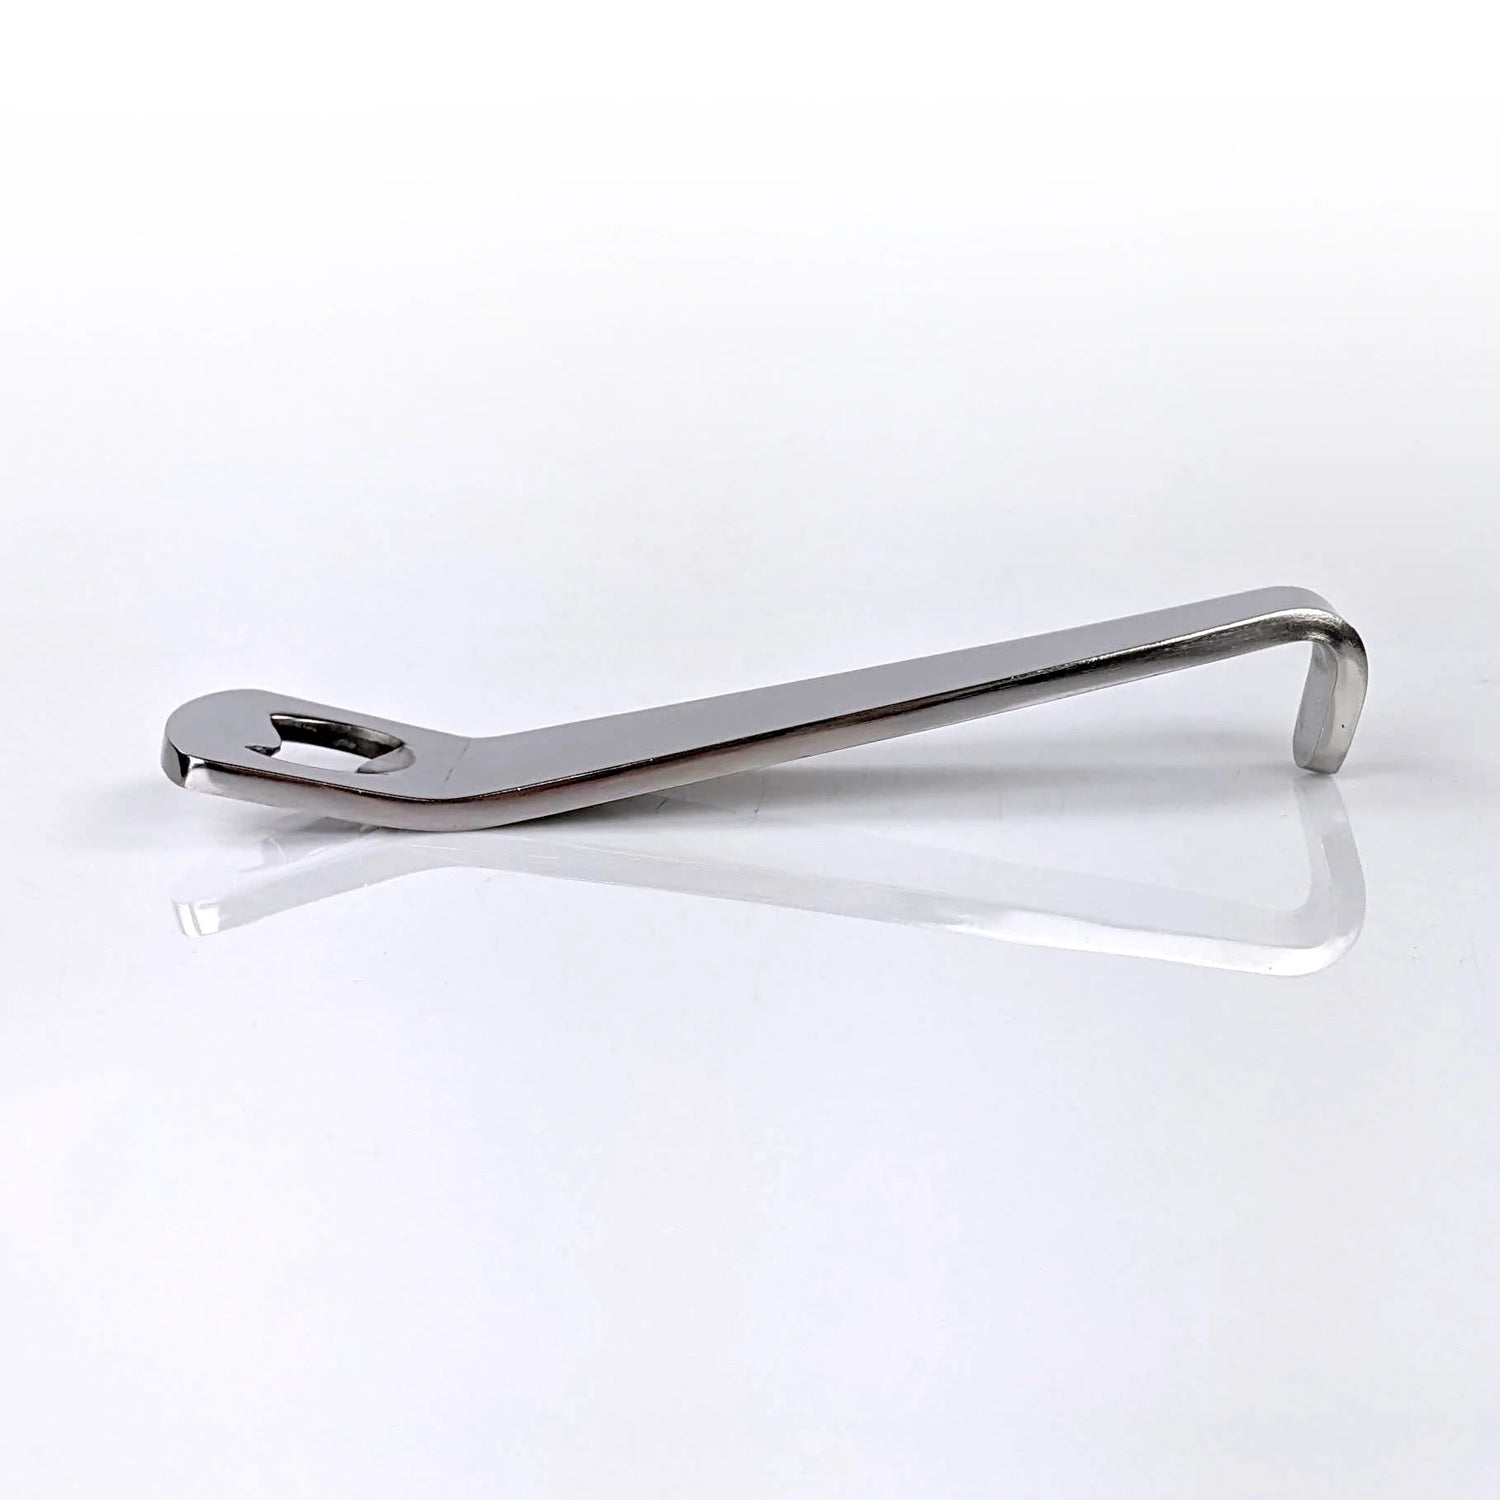 Stainless Steel bottle opener with a hook on one end to hang onto buckets, cups, and bins